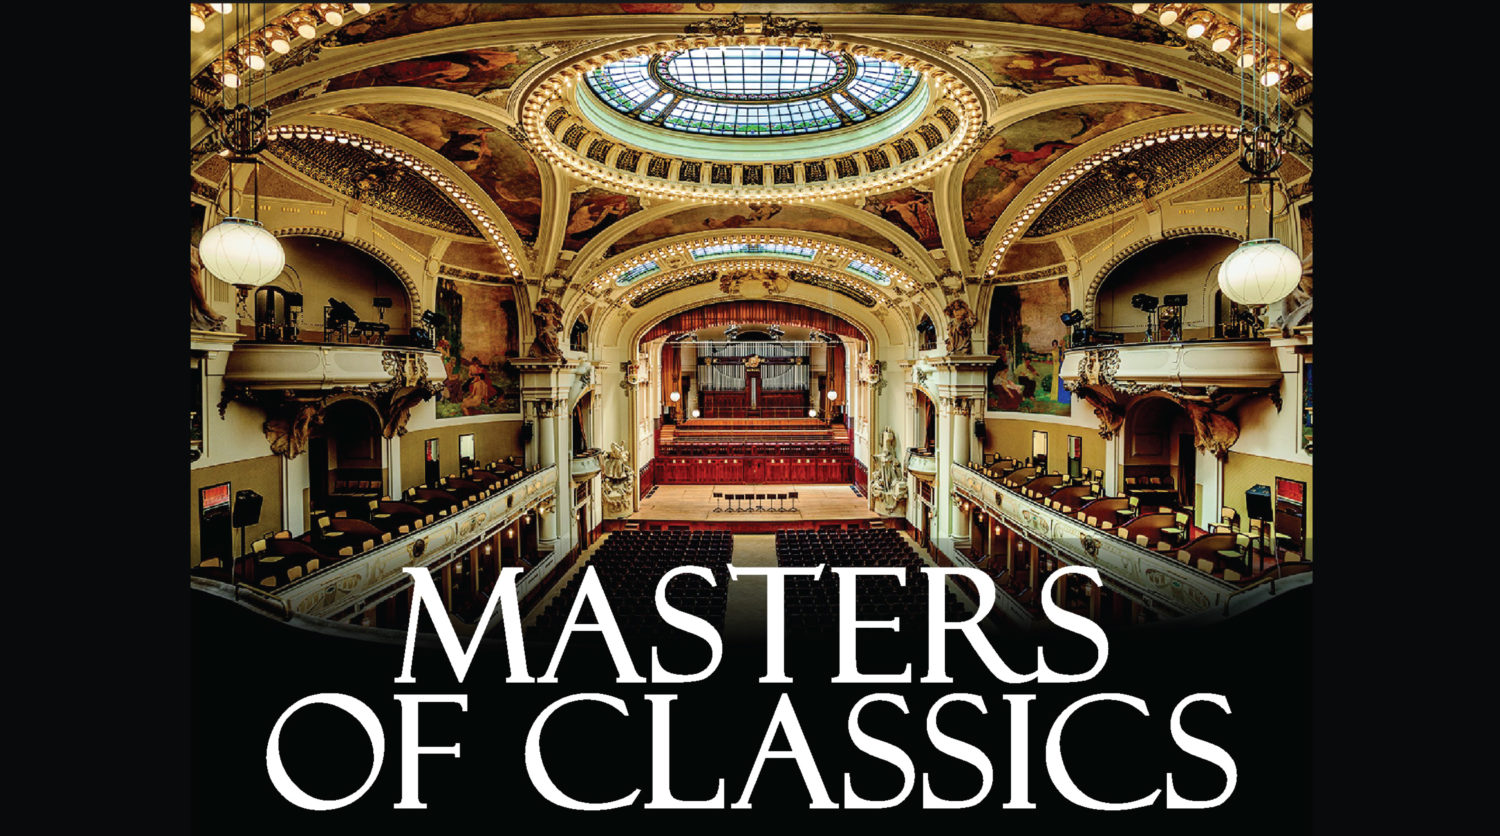 MASTERS OF CLASSICS IN THE MUNICIPAL HOUSE 11.08.2020 - přesun z 16.06.2020